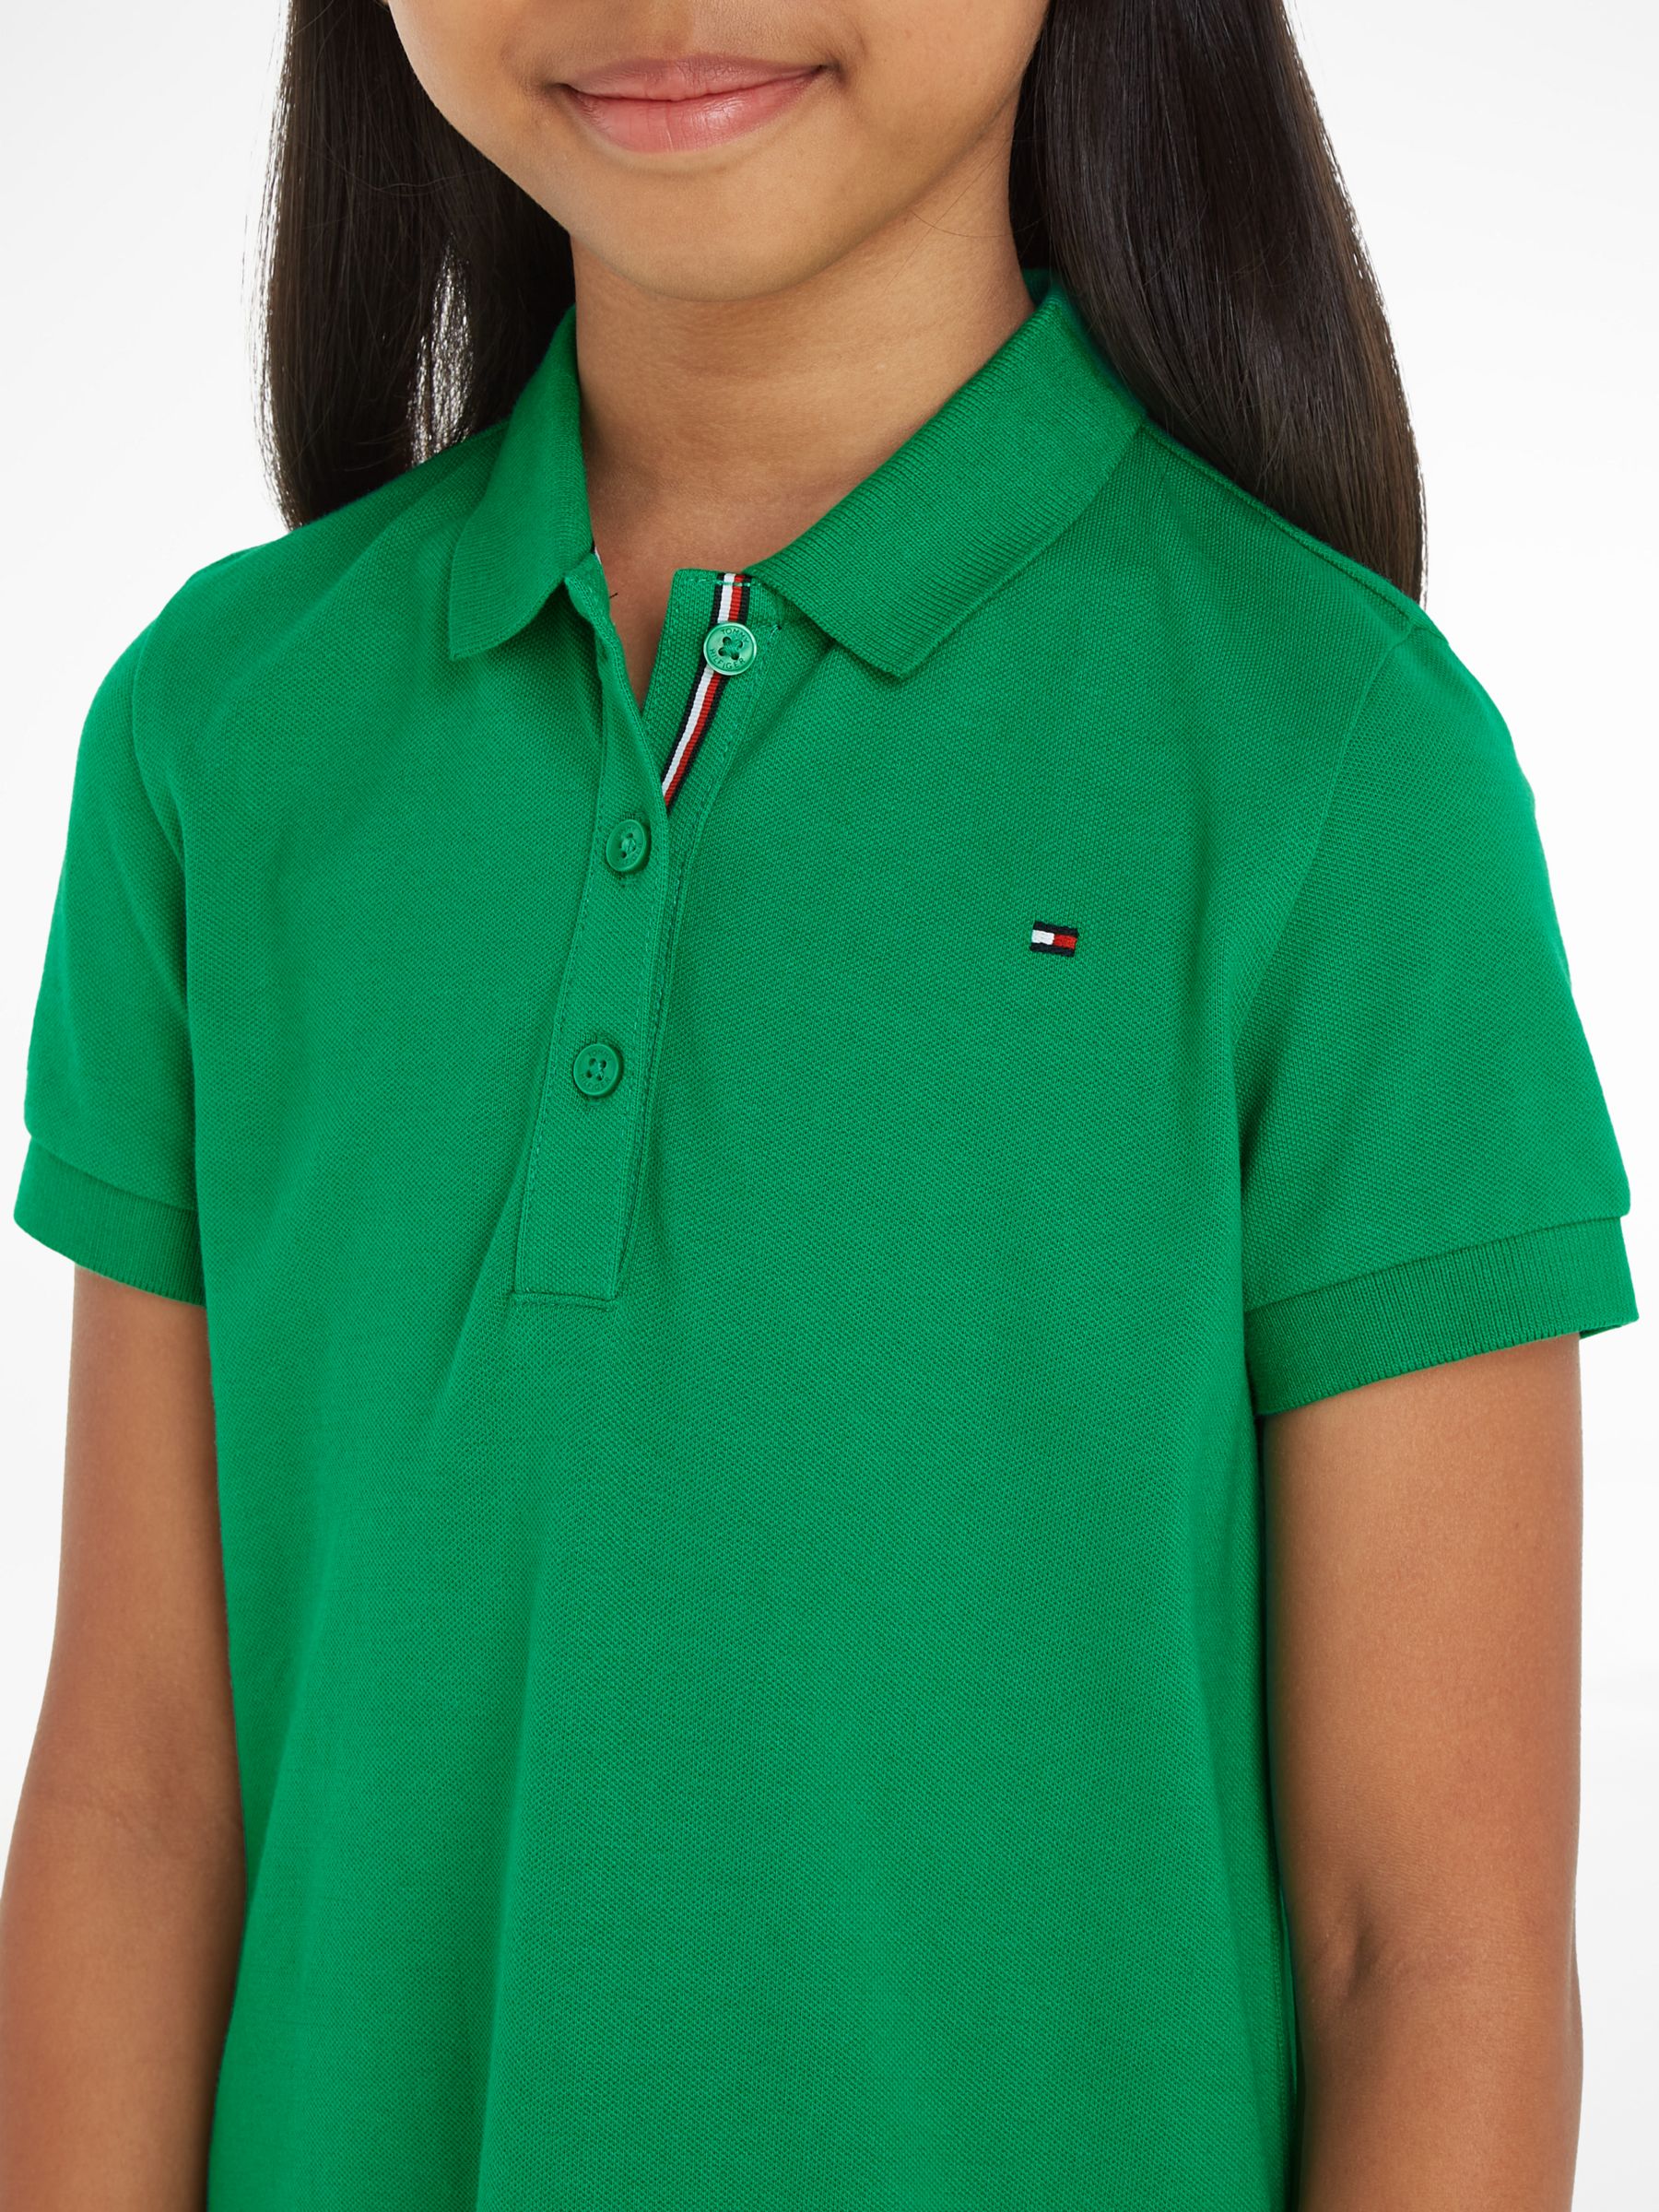 Buy Tommy Hilfiger Kids' Essential Flag Polo Dress, Olympic Green Online at johnlewis.com